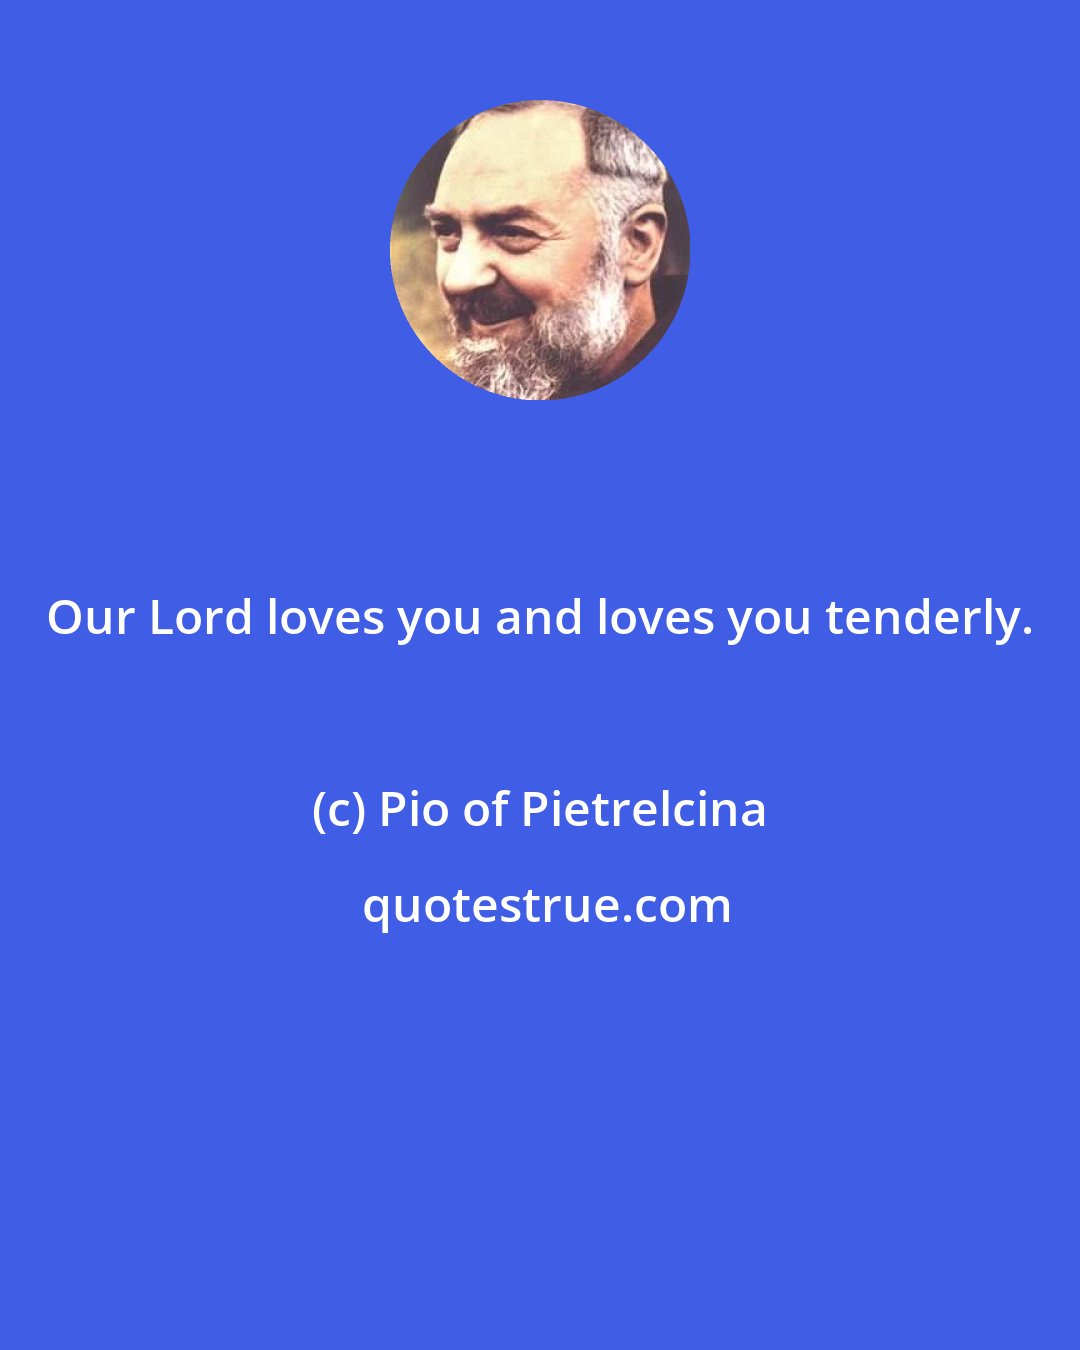 Pio of Pietrelcina: Our Lord loves you and loves you tenderly.